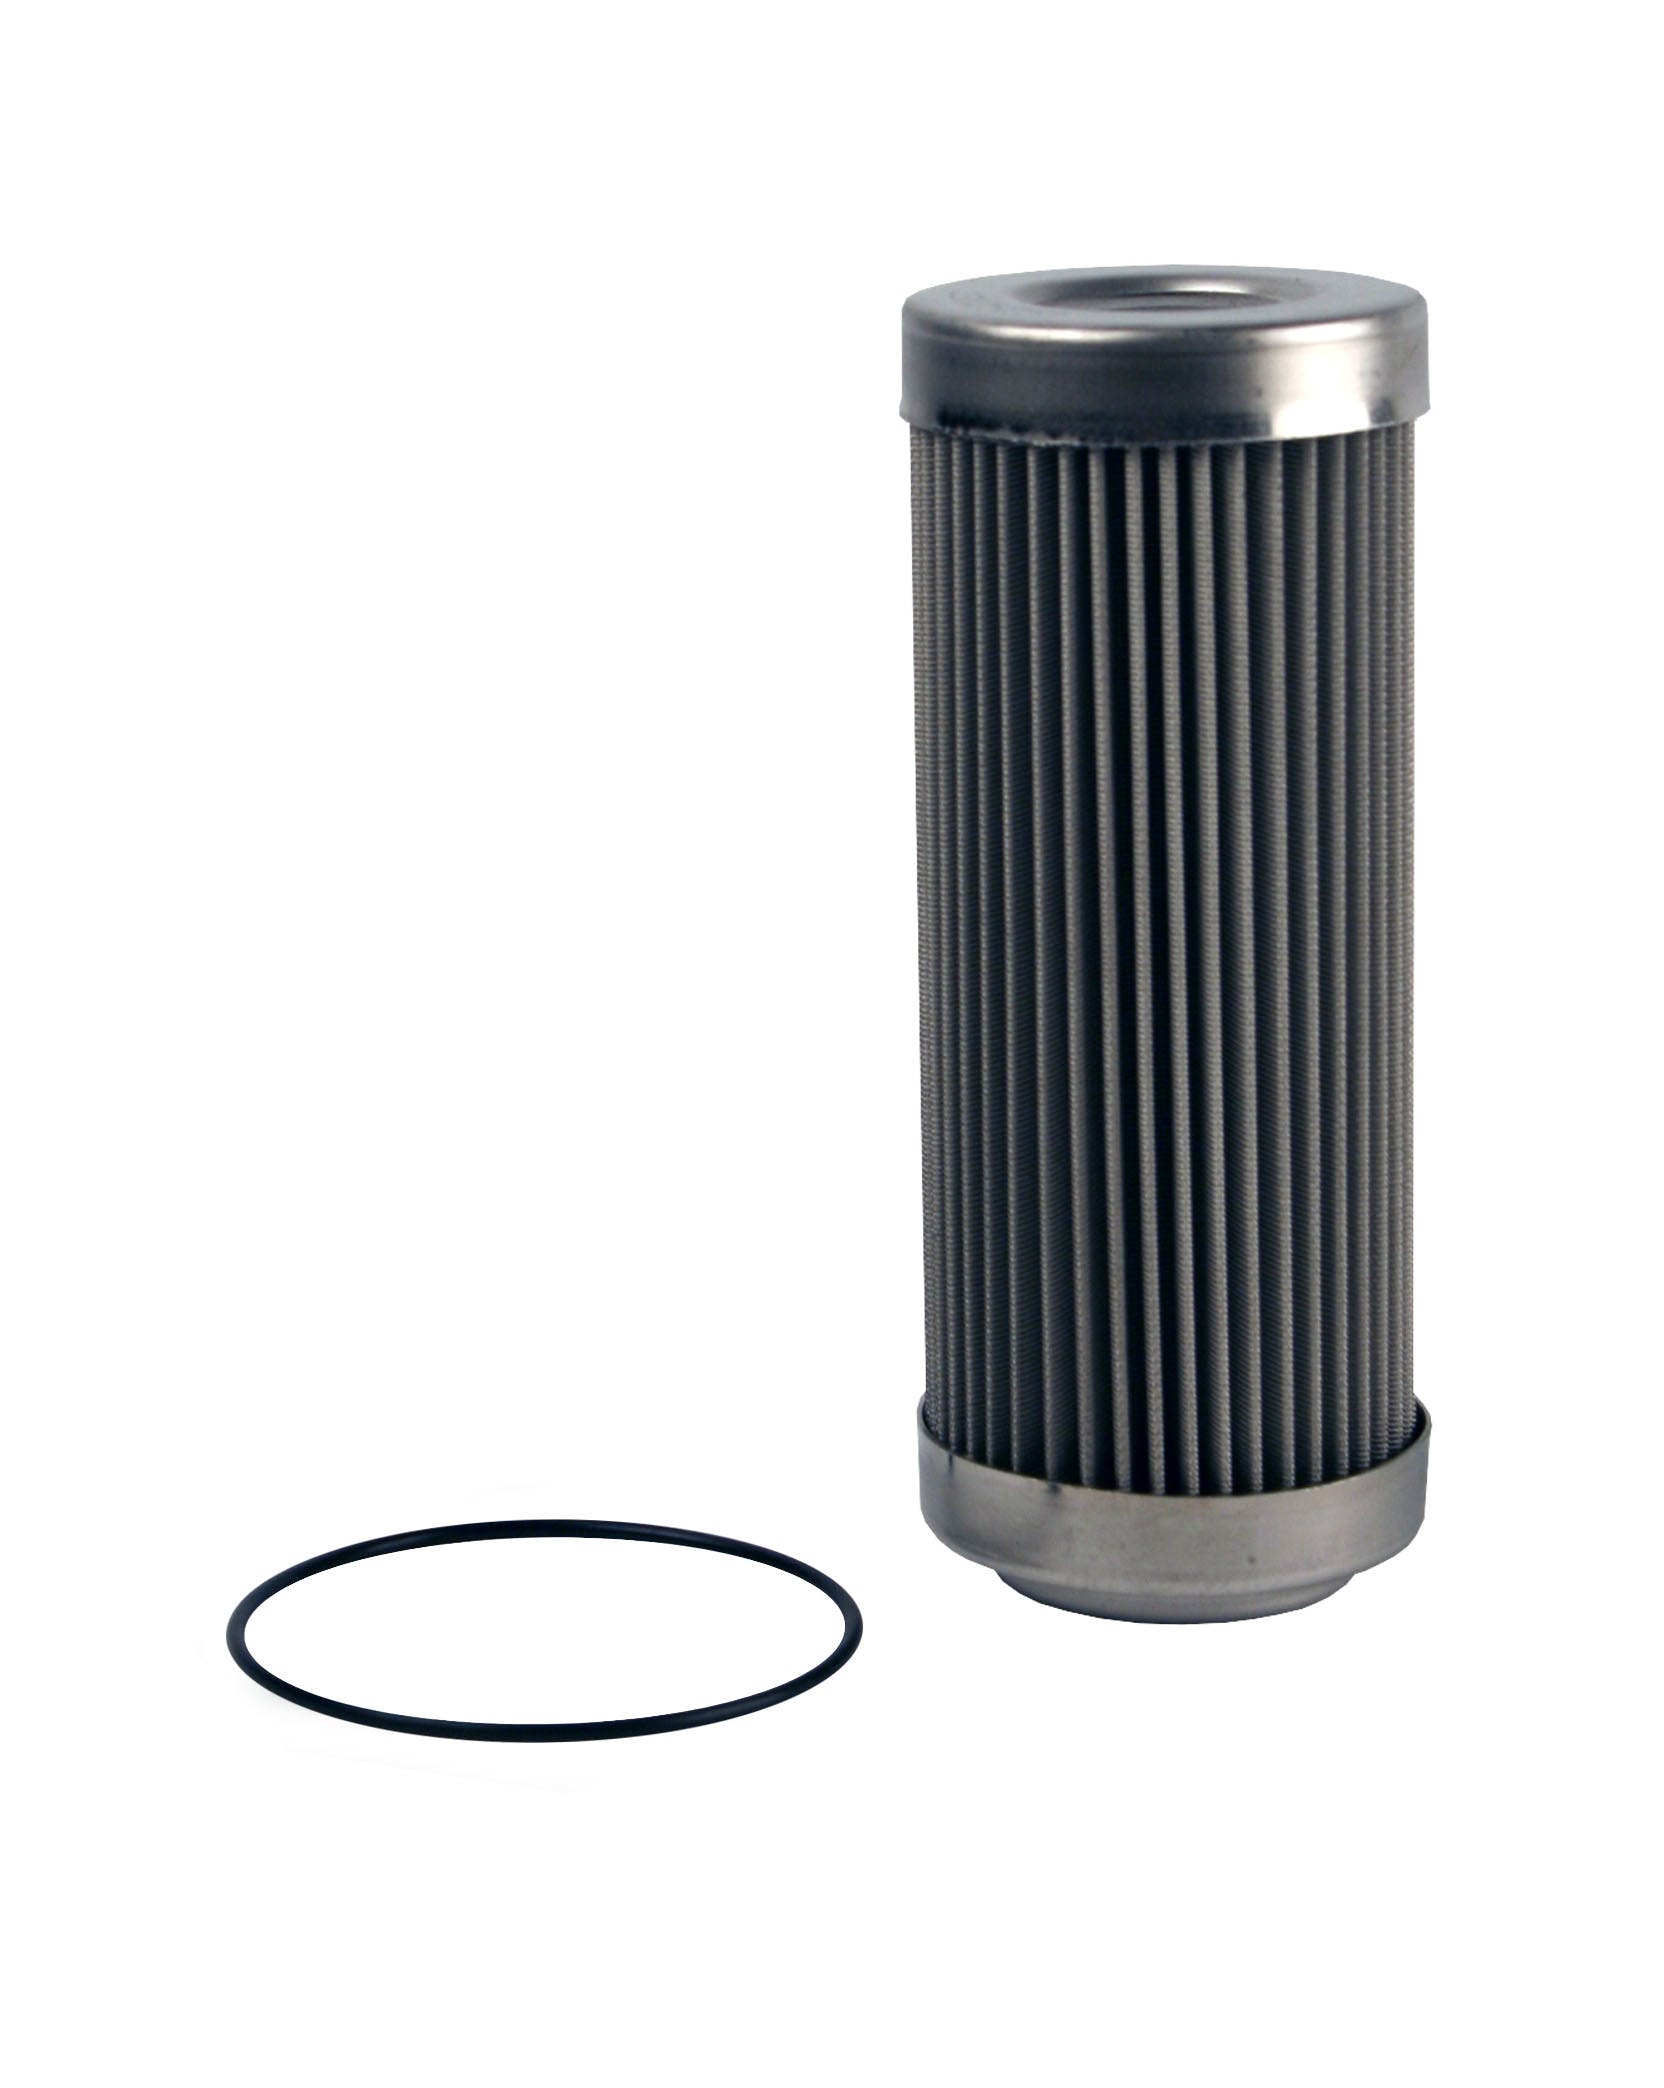 Aeromotive Fuel System 12642 Filter Element, 40 Micron Stainless Steel (Fits 12342)